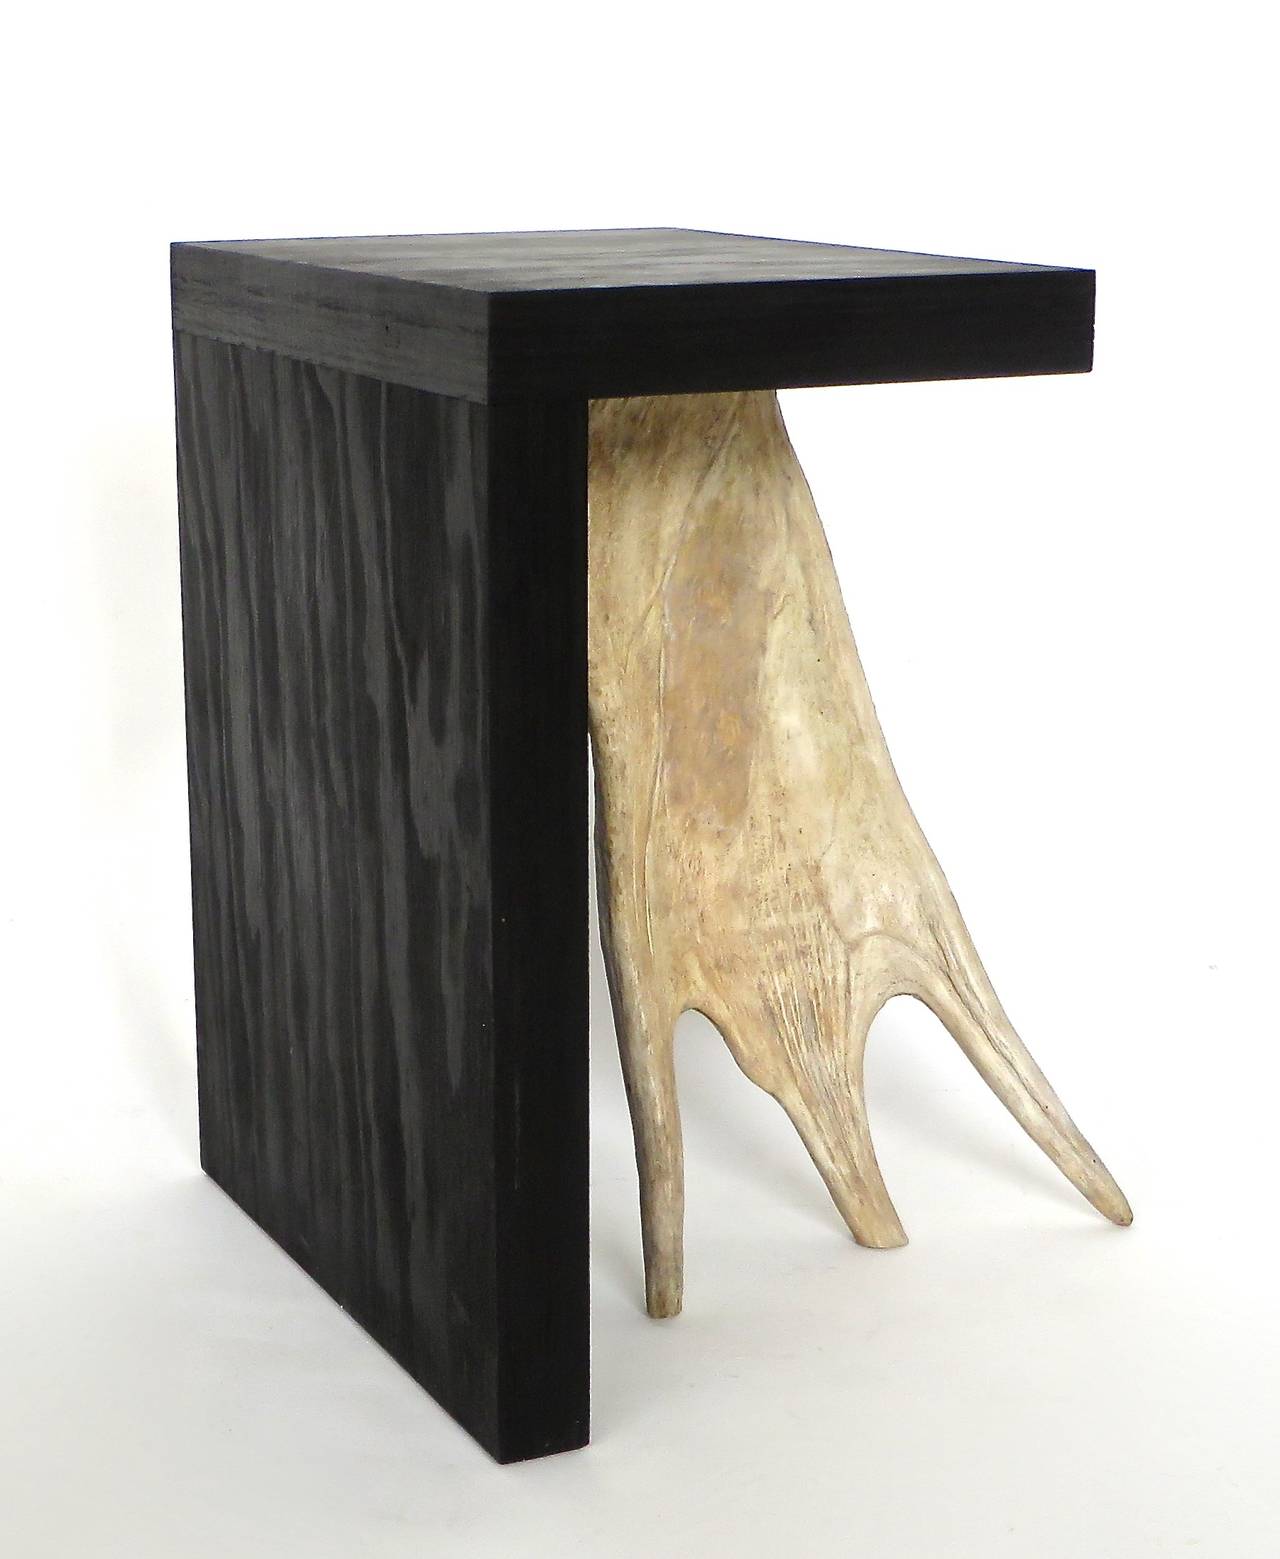 Black ebonized stained solid plywood forms with elk or moose antler.
Iconic Rick Owens use of natural and organic modern materials.
These are from the open edition series. Each stool is signed on the base and is a piece unique. May be used as side